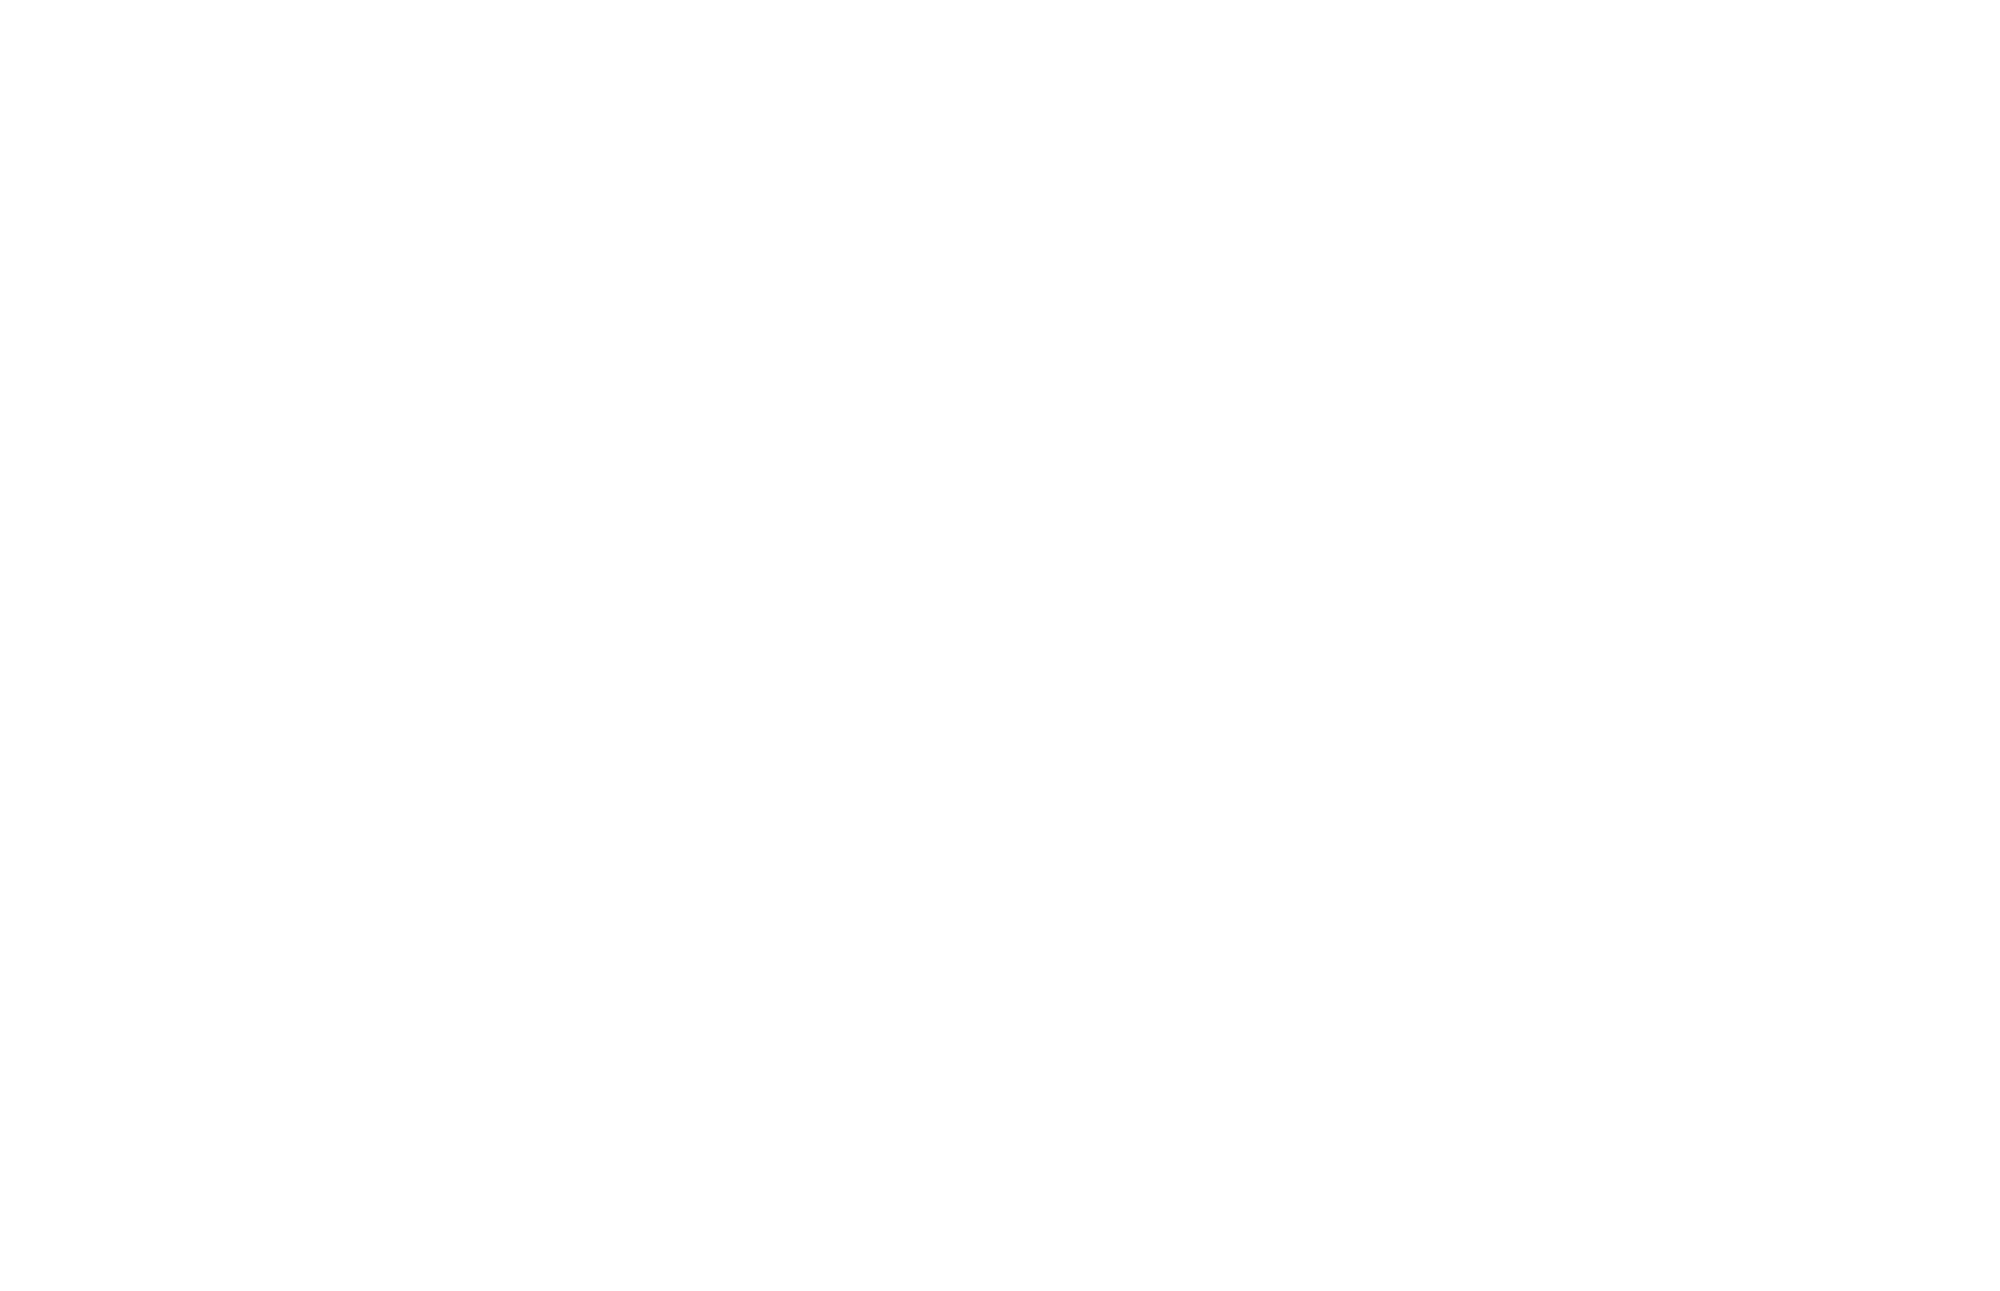 The Capitol by Warren County Public Library